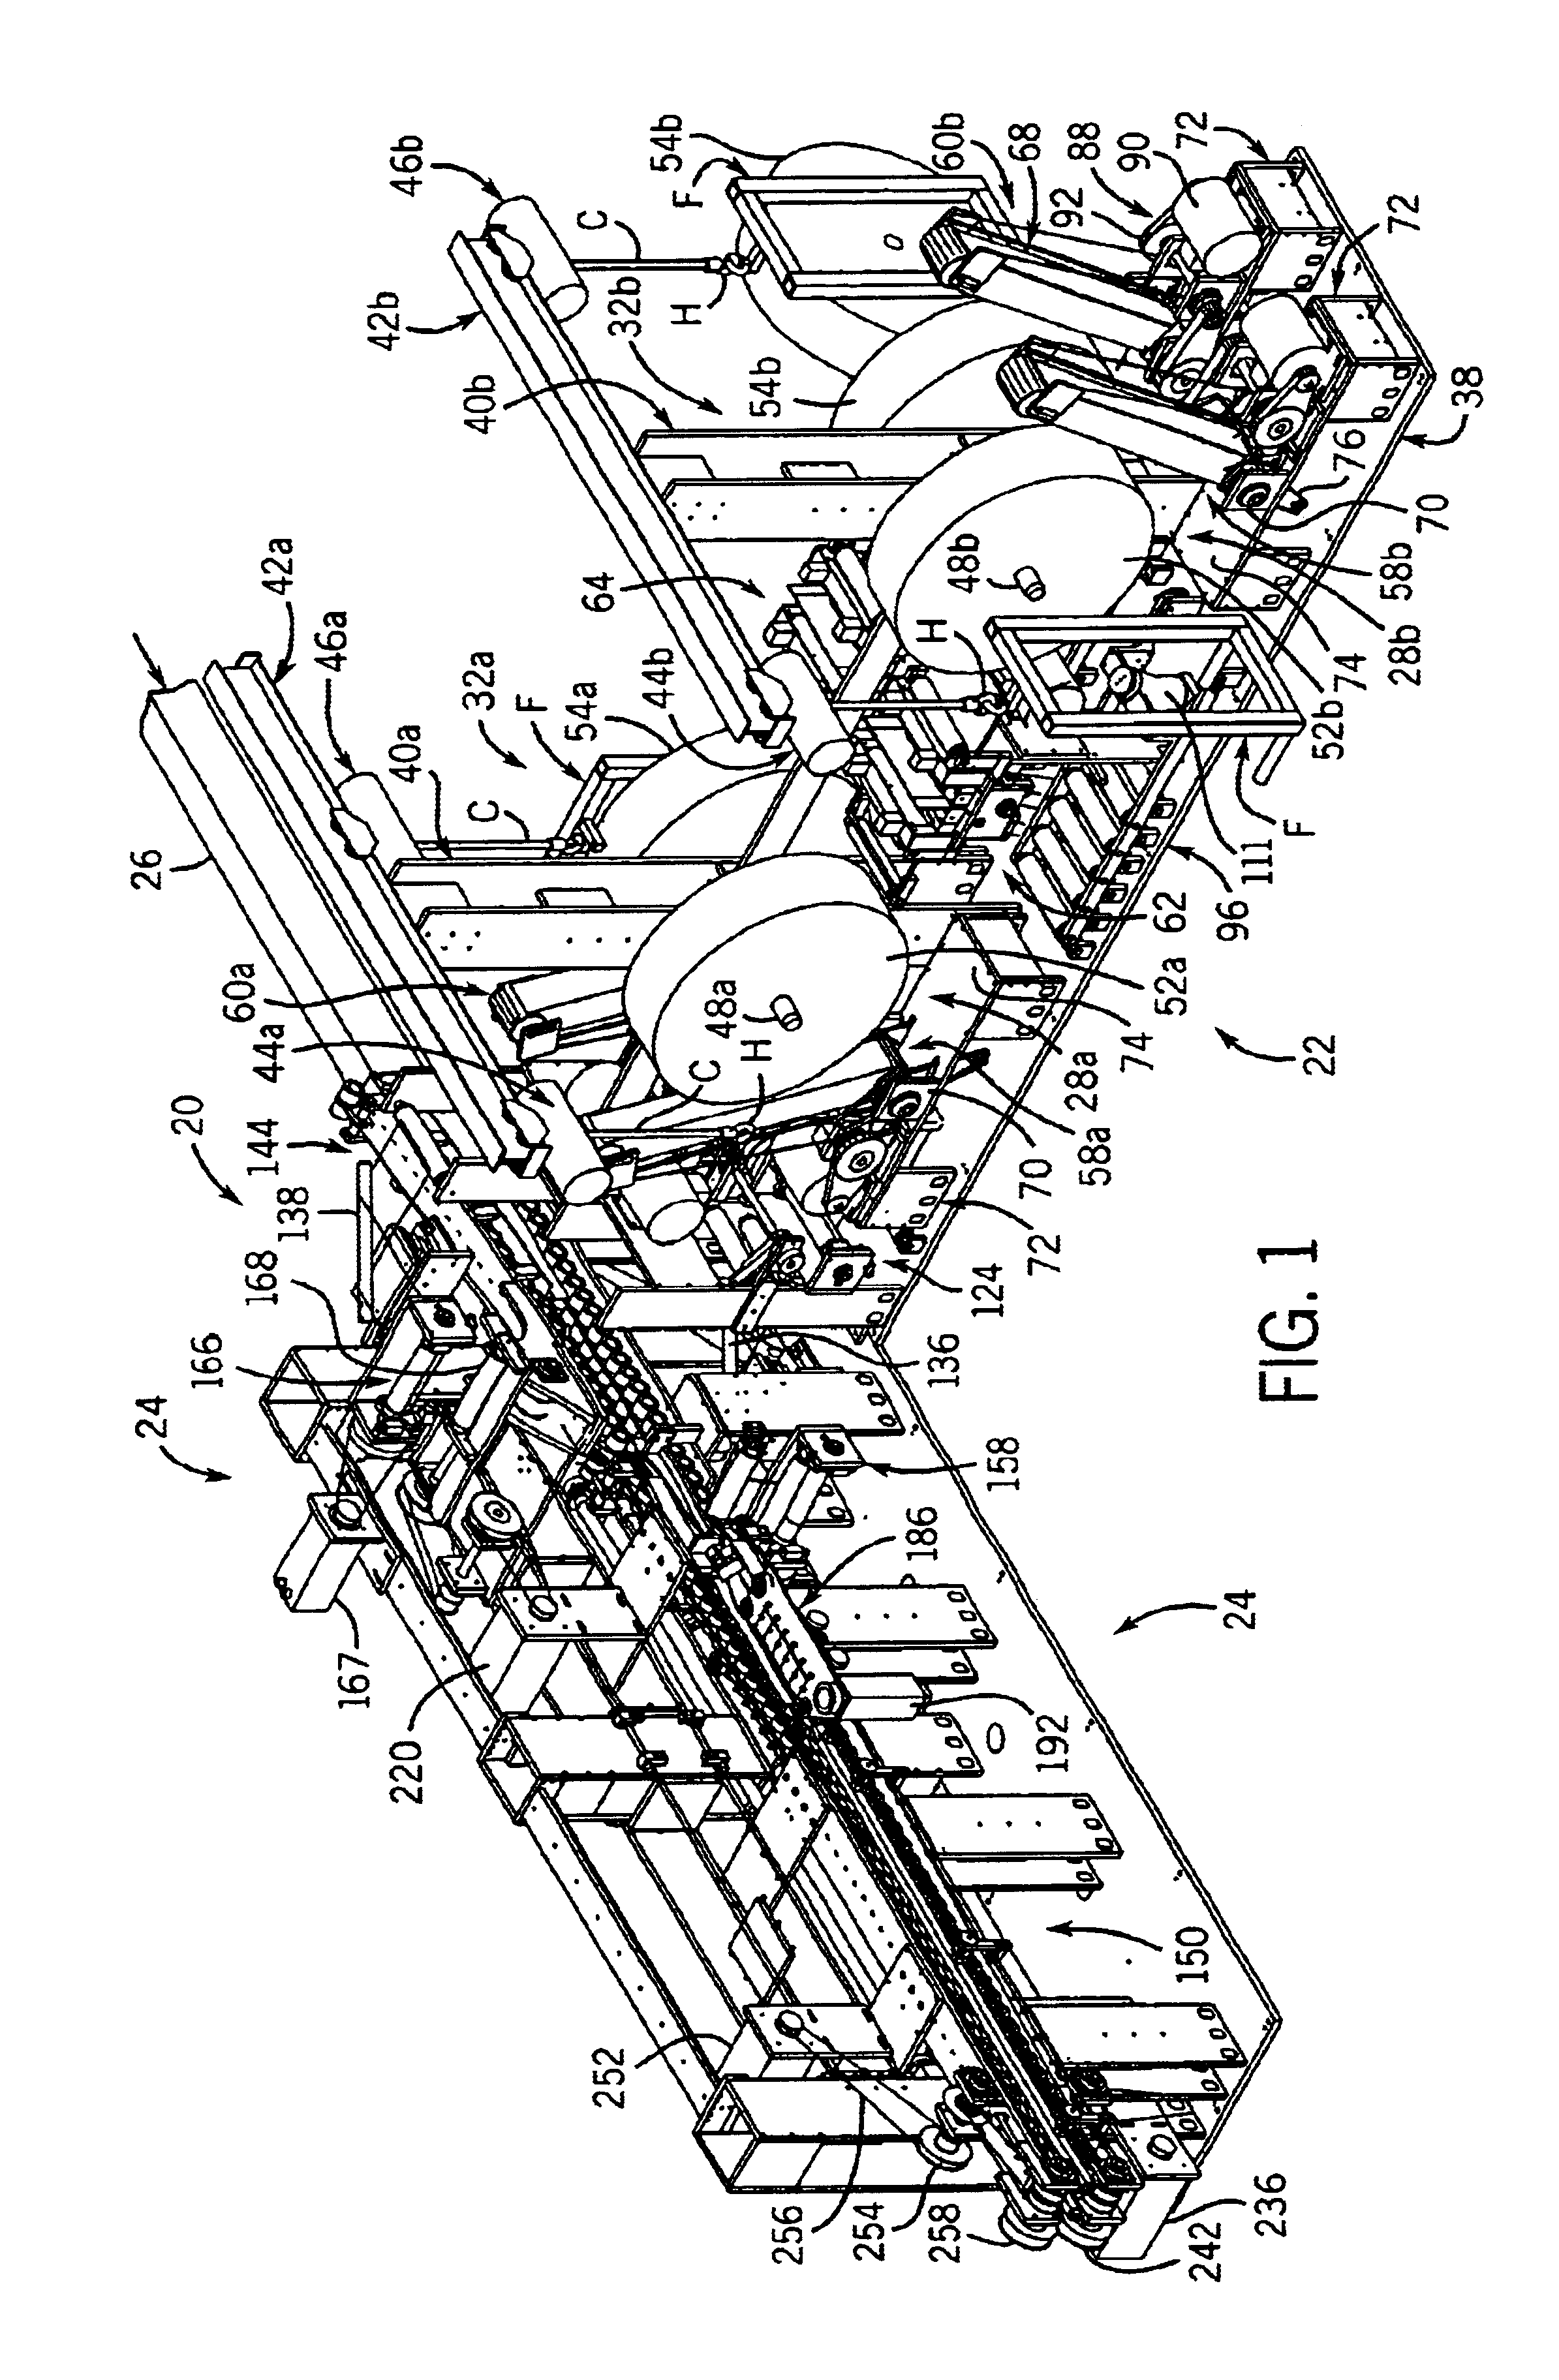 Banding system including an internal backing member for wrapping an elongated article such as a stack of interfolded paper towels